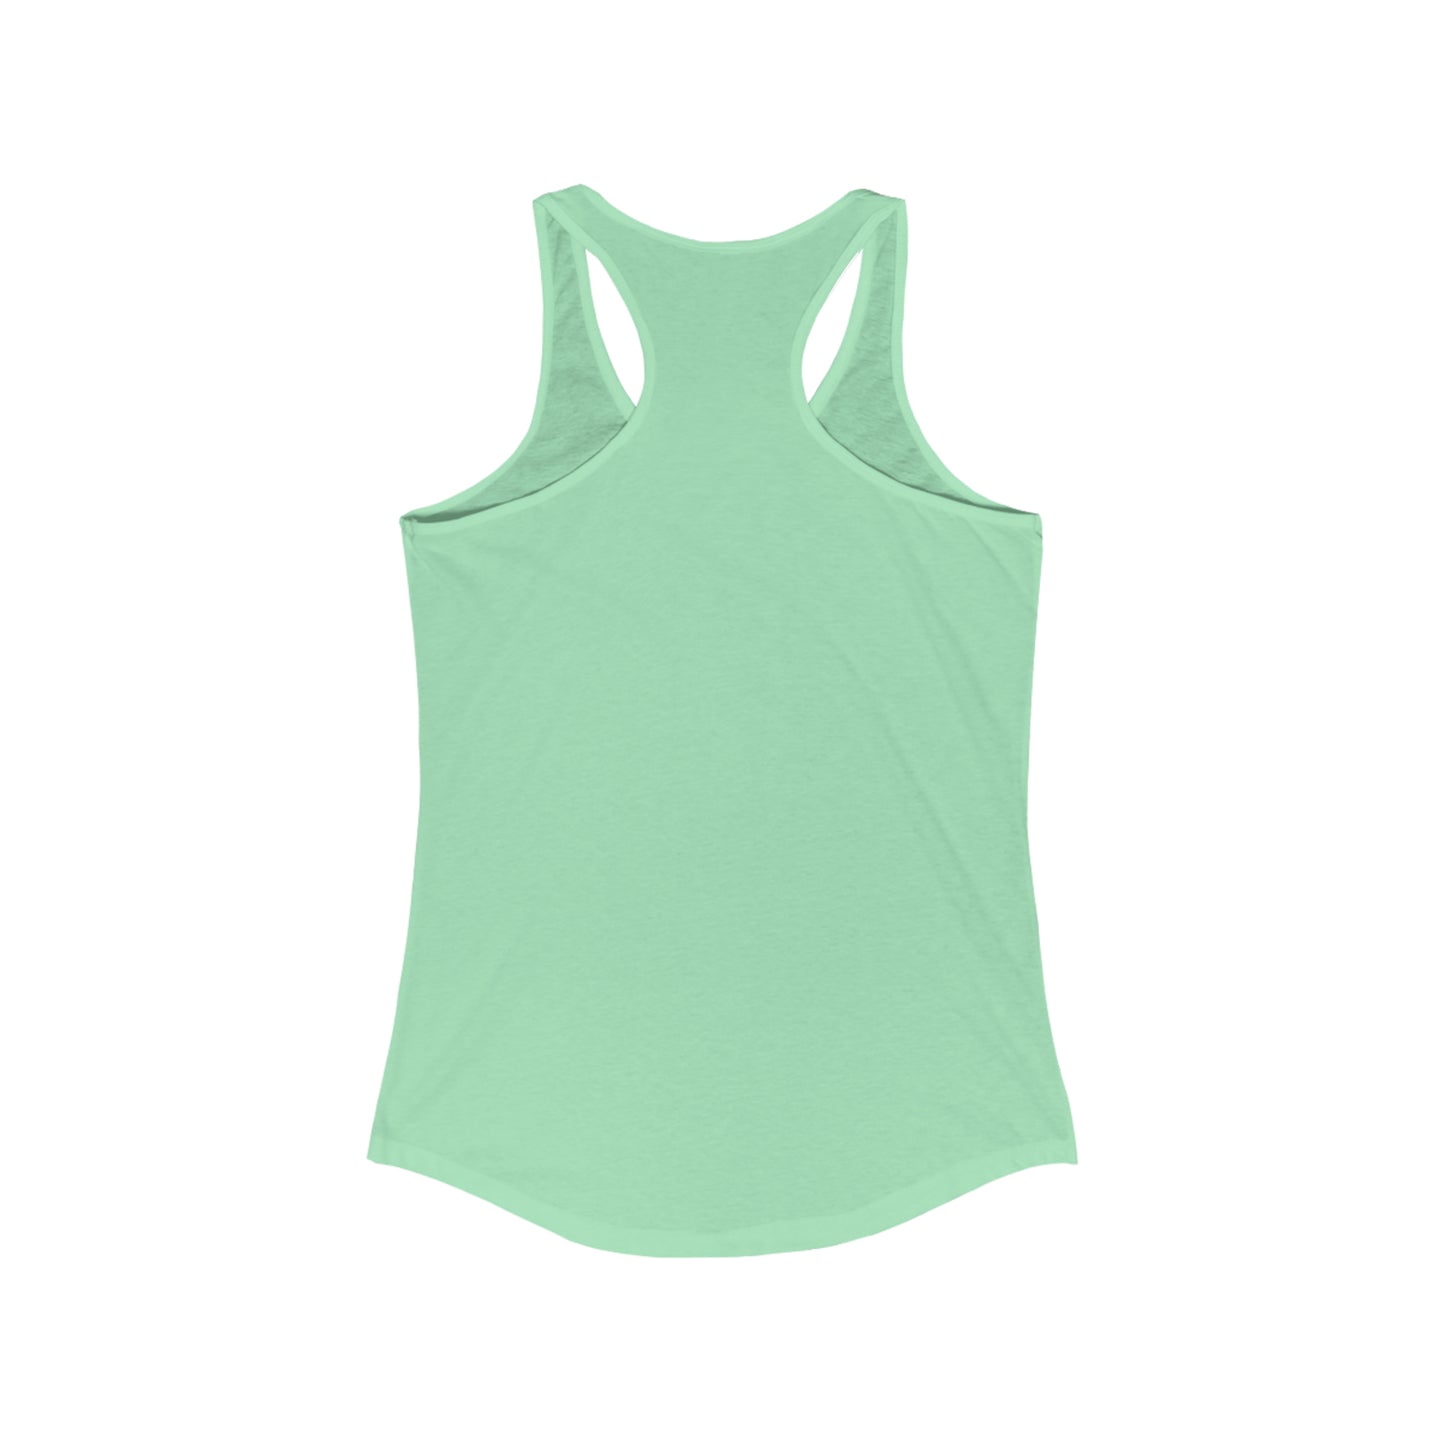 Cruise Crew 2024–Most Likely to Fall Overboard–Women's Ideal Racerback Tank